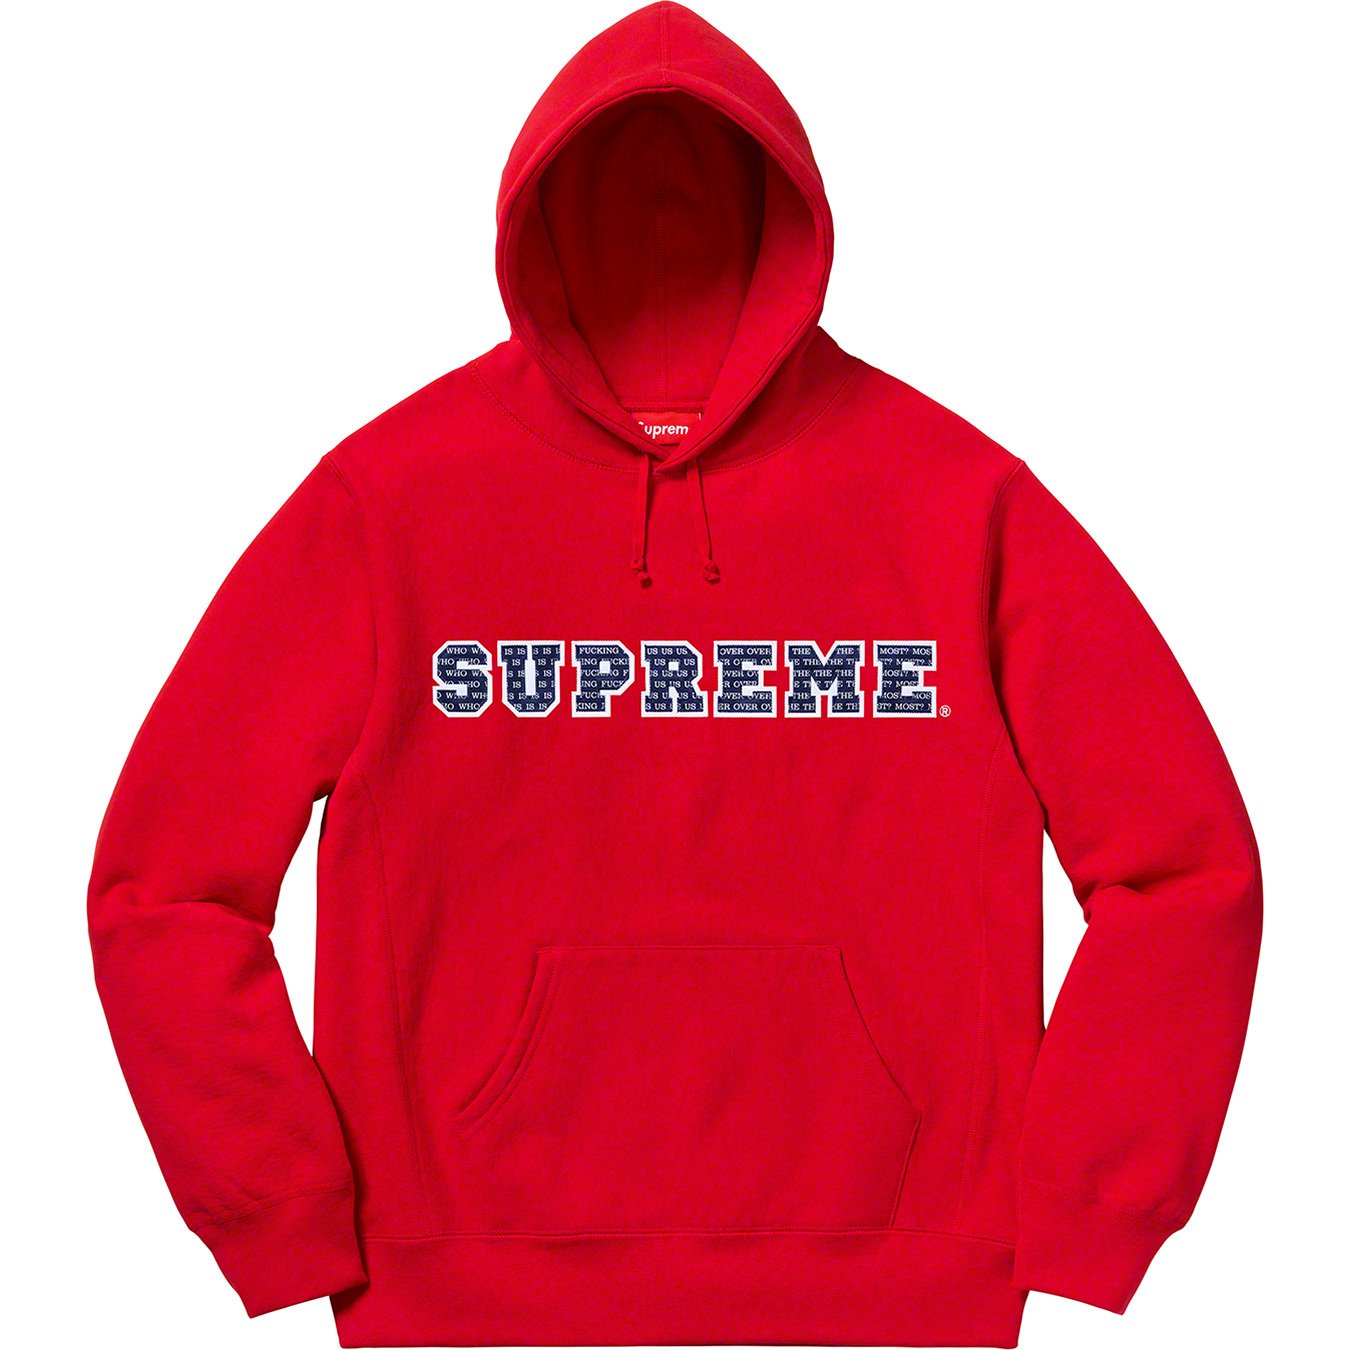 The Most Hooded Sweatshirt - fall winter 2019 - Supreme